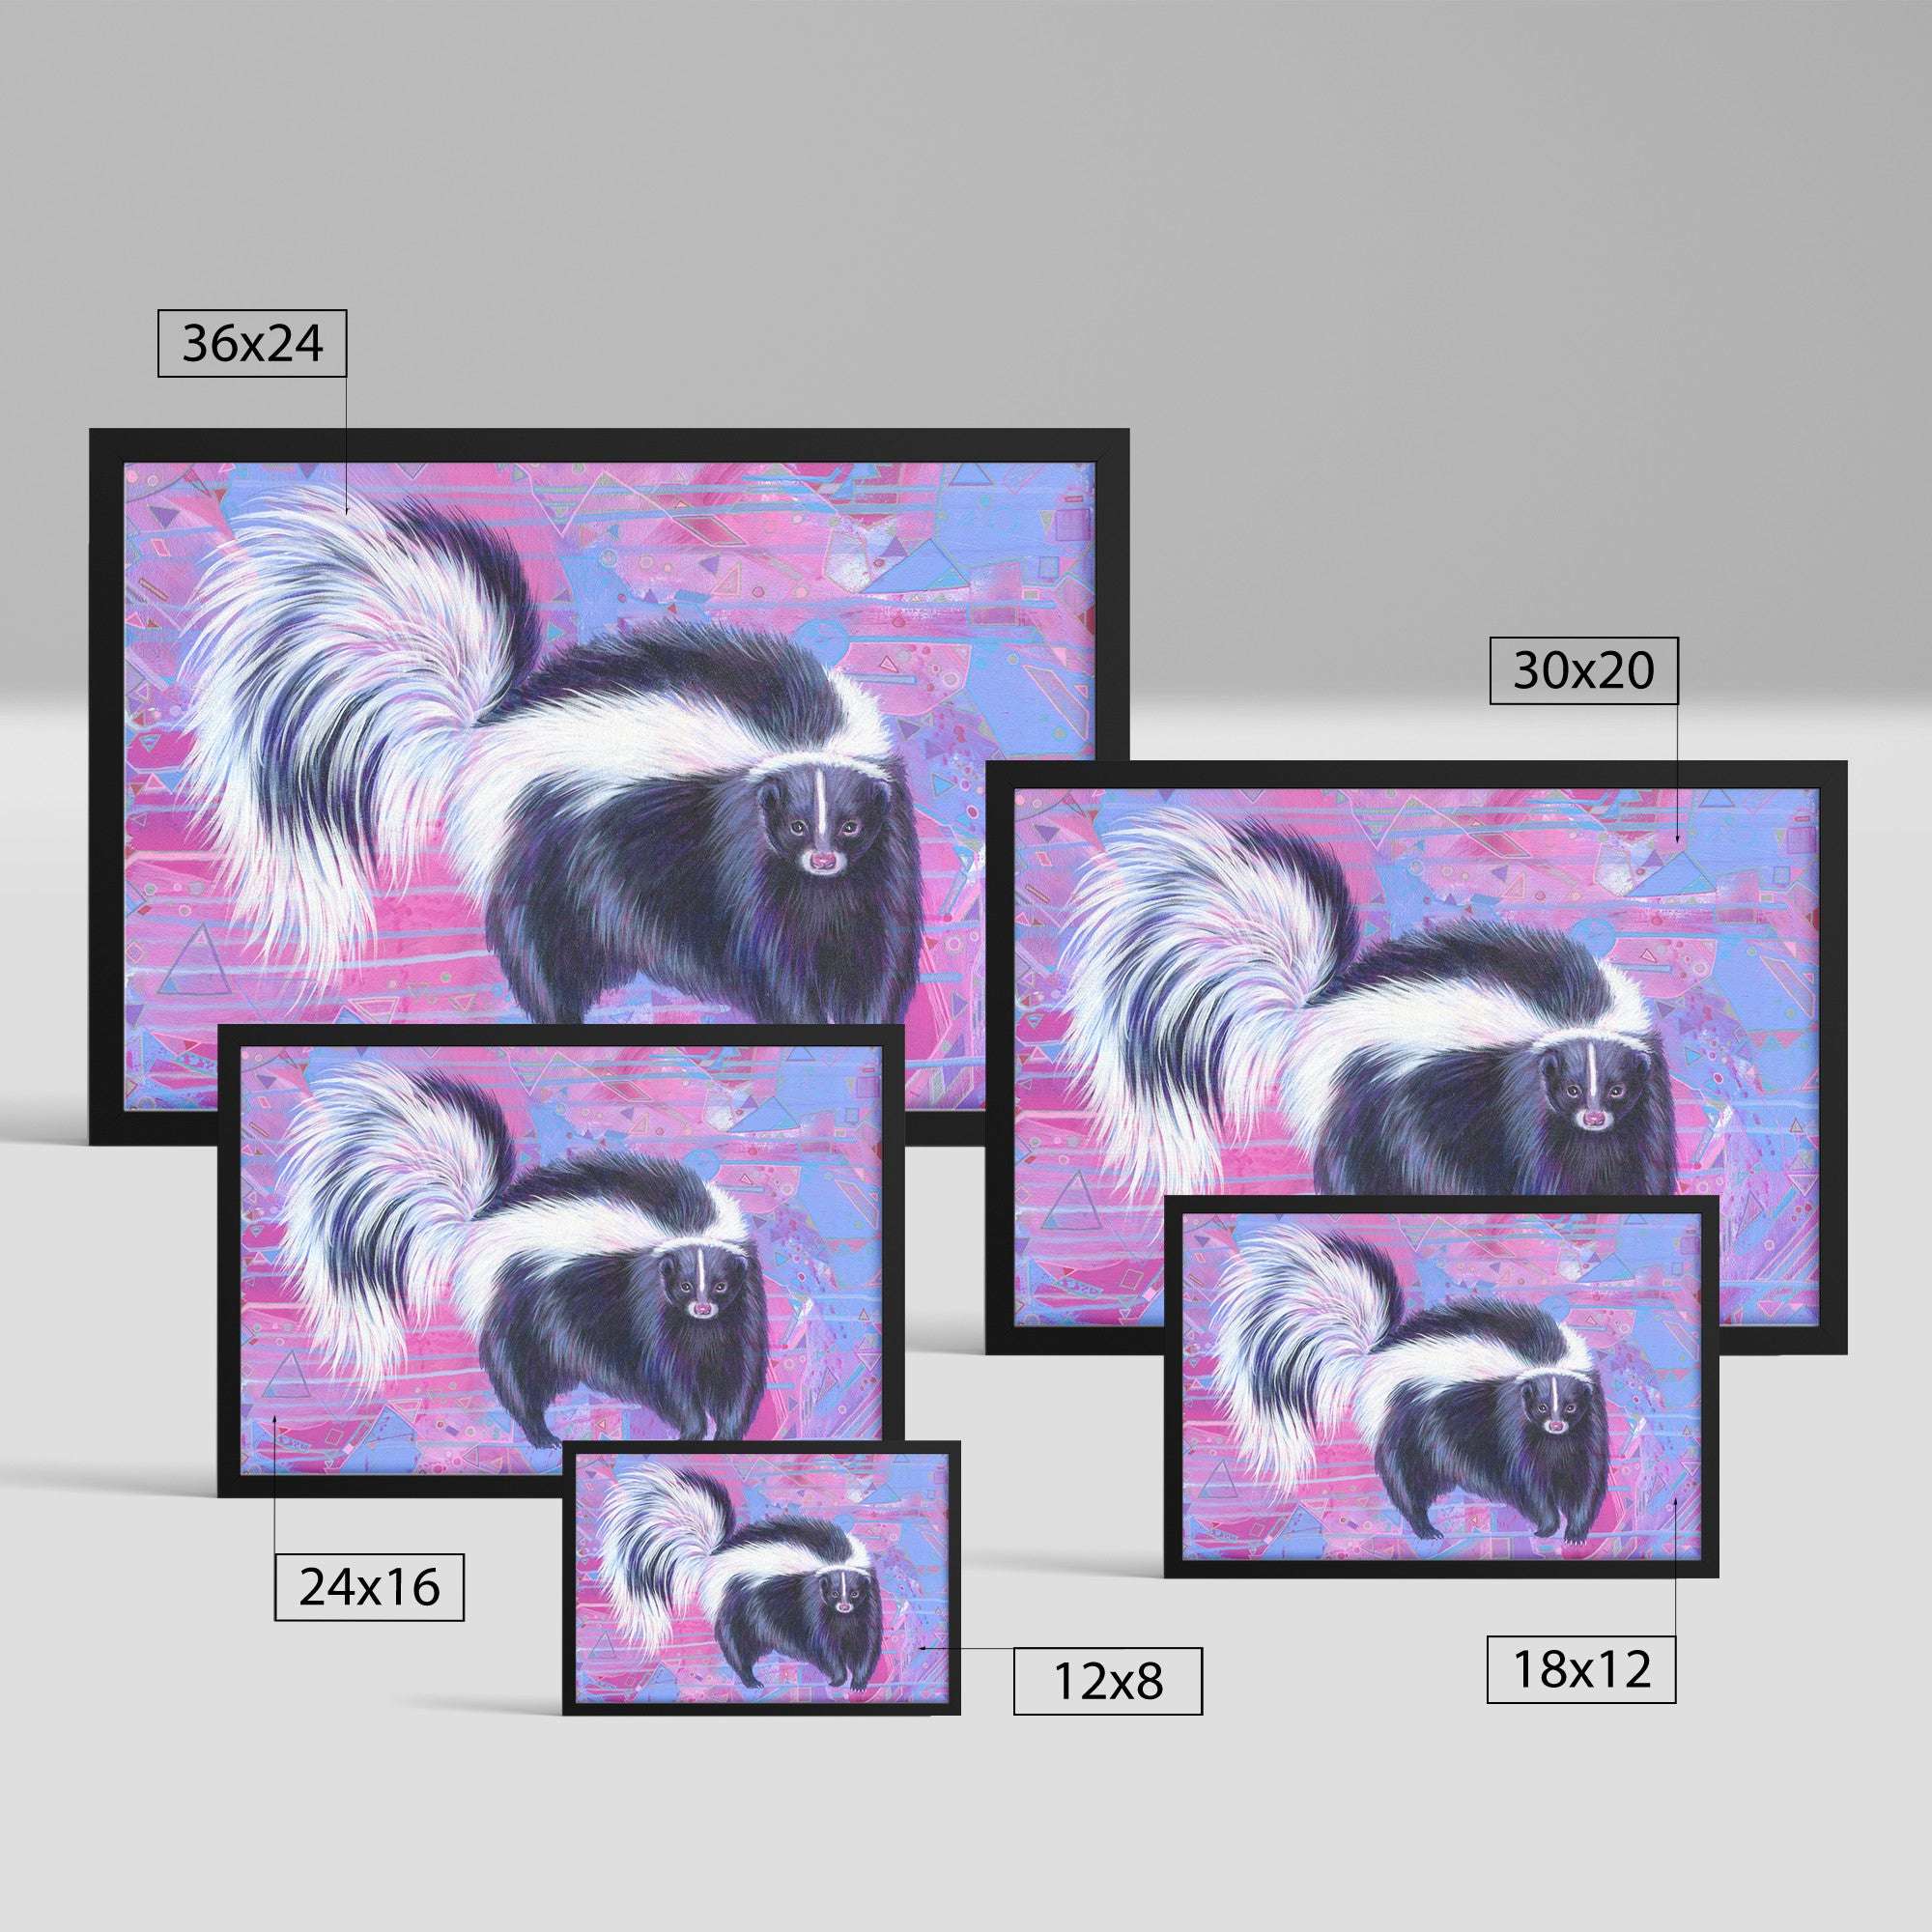 Five Framed Skunk Art Prints depicting a skunk on a pink and blue background, shown in various sizes.